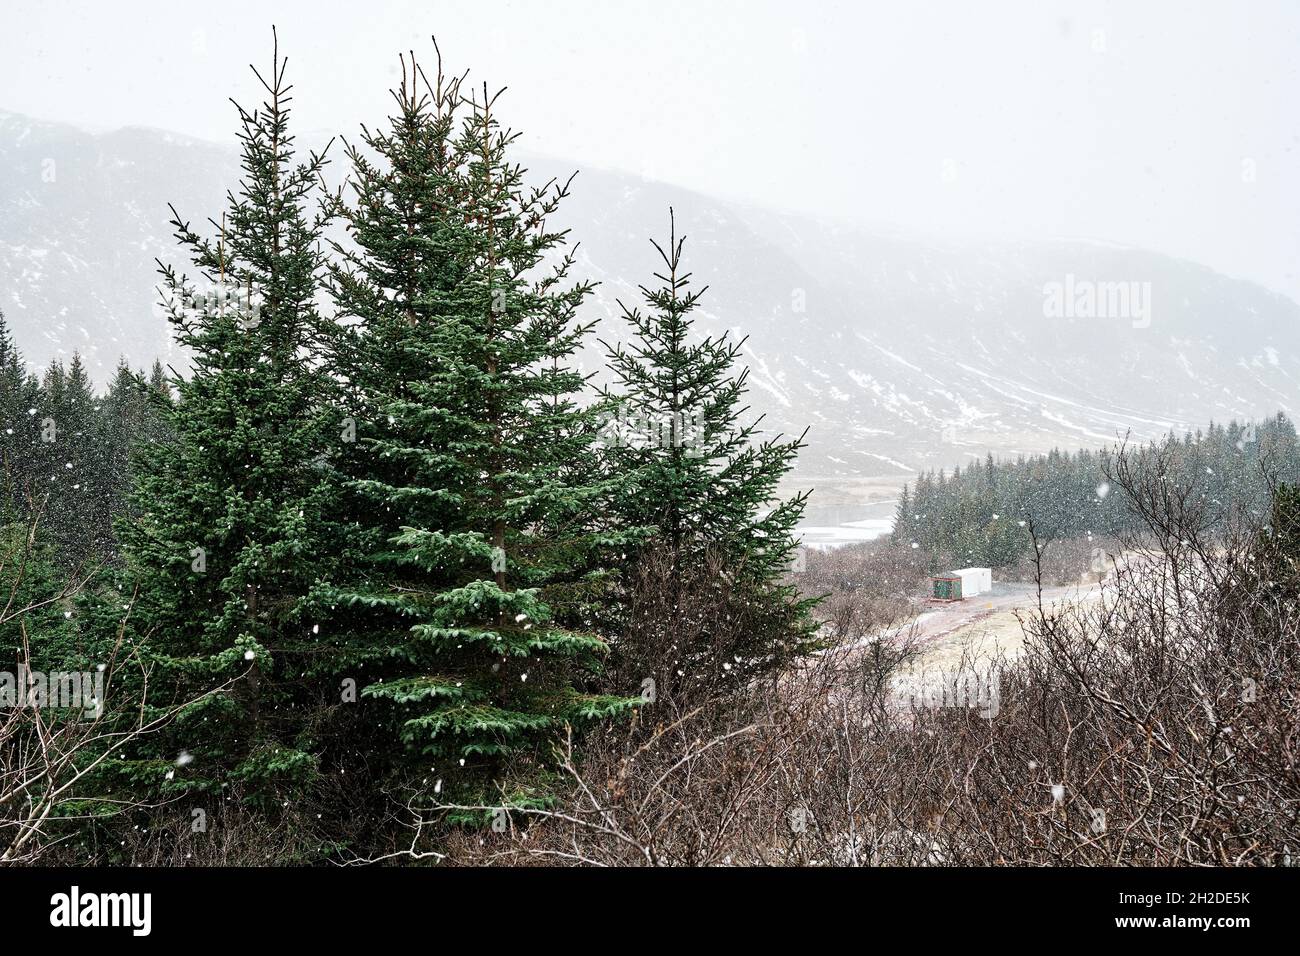 Picturesque view of coniferous trees growing against majestic mount under foggy sky in snowfall in Iceland Stock Photo